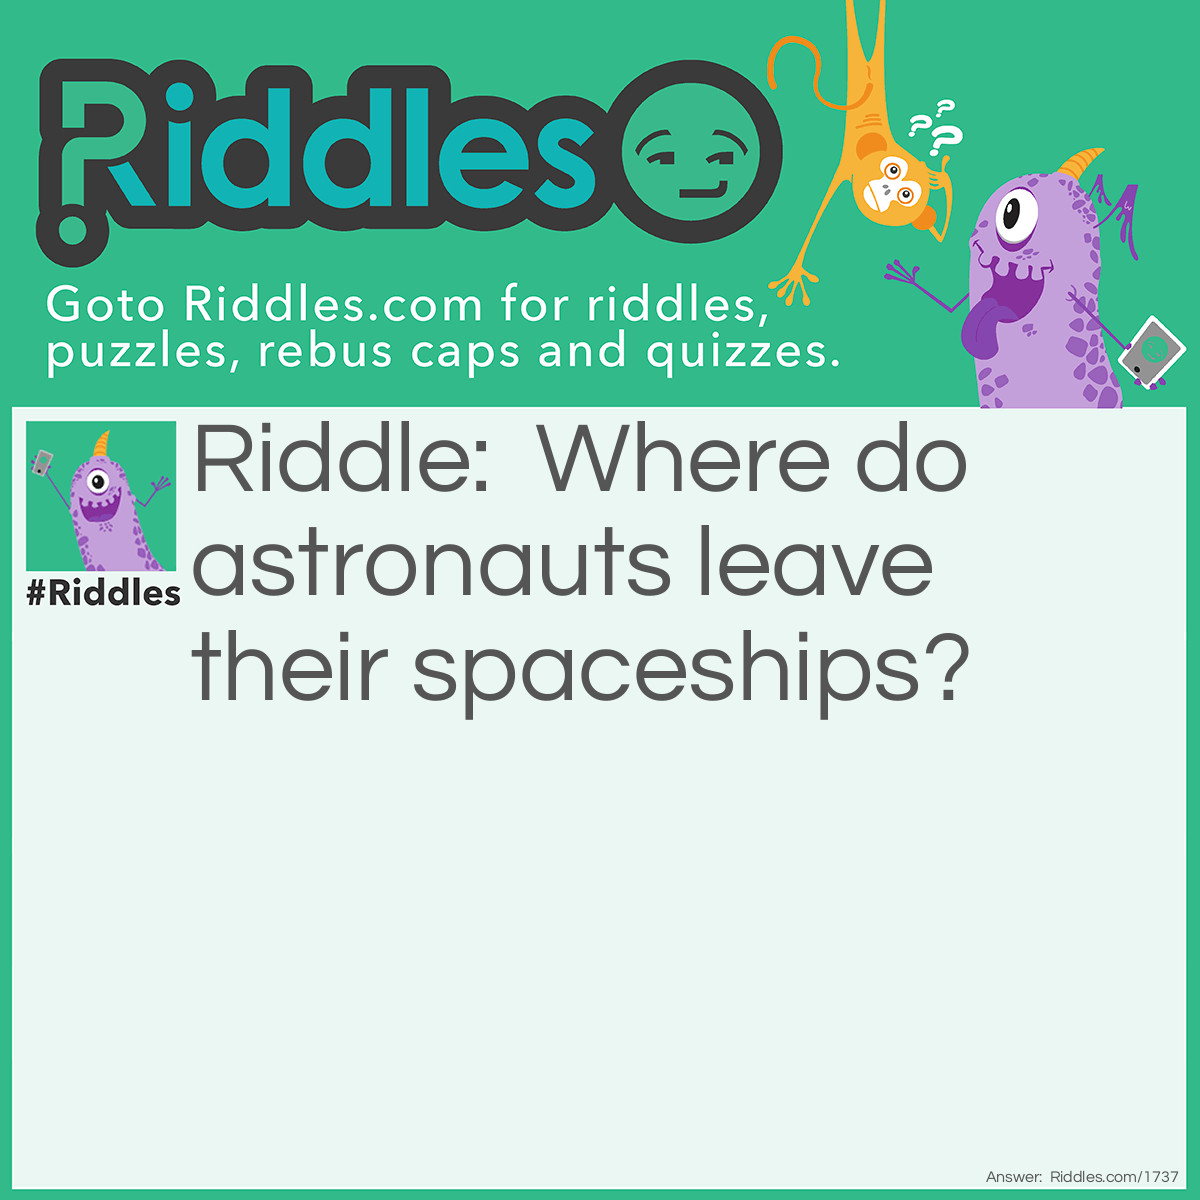 Riddle: Where do astronauts leave their spaceships? Answer: At parking meteors